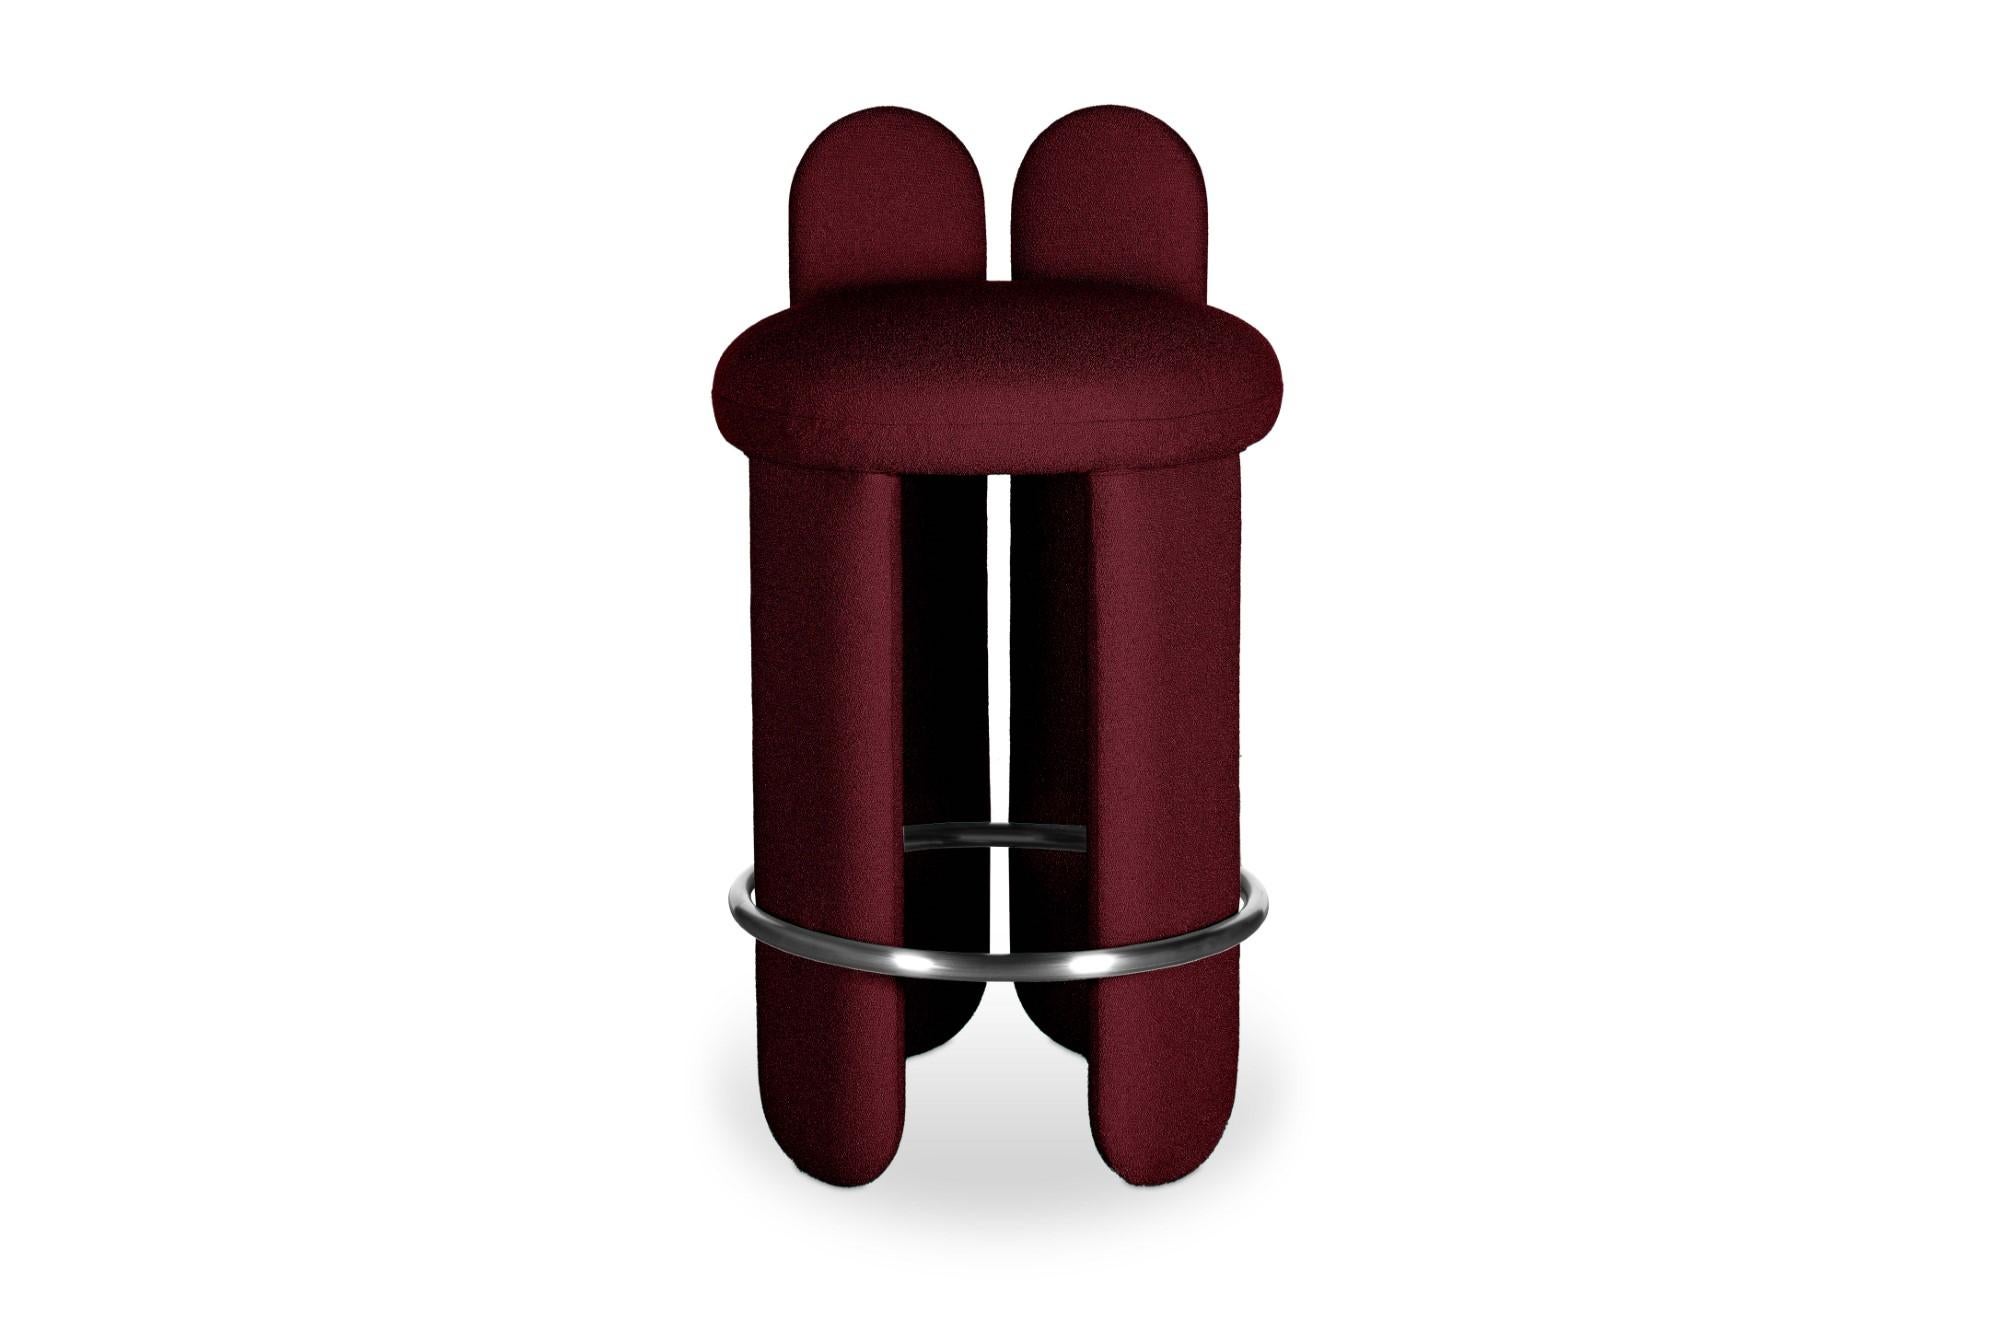 Glazy counter stool by Royal Stranger
Dimensions: Width 55cm, height 90cm, depth 60cm, seat height 84cm
Materials: Solid wood frame, foam, upholstery, stainless steel.
Color: Lago Bordeaux.
Available in brass, stainless steel or copper. Also